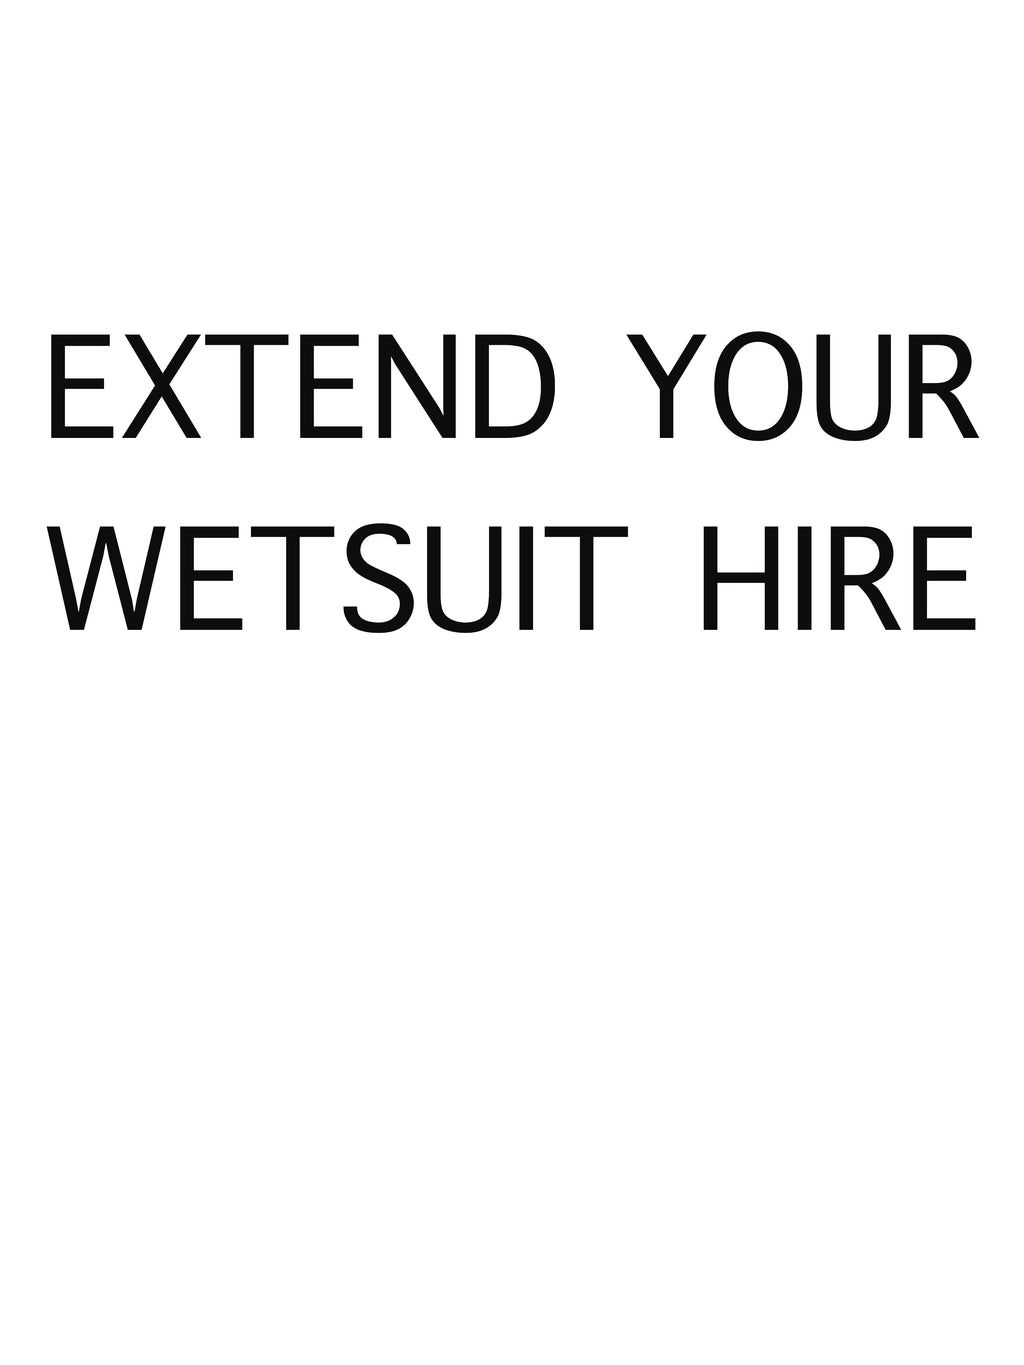 wetsuit hire extension from 1 month to end of season